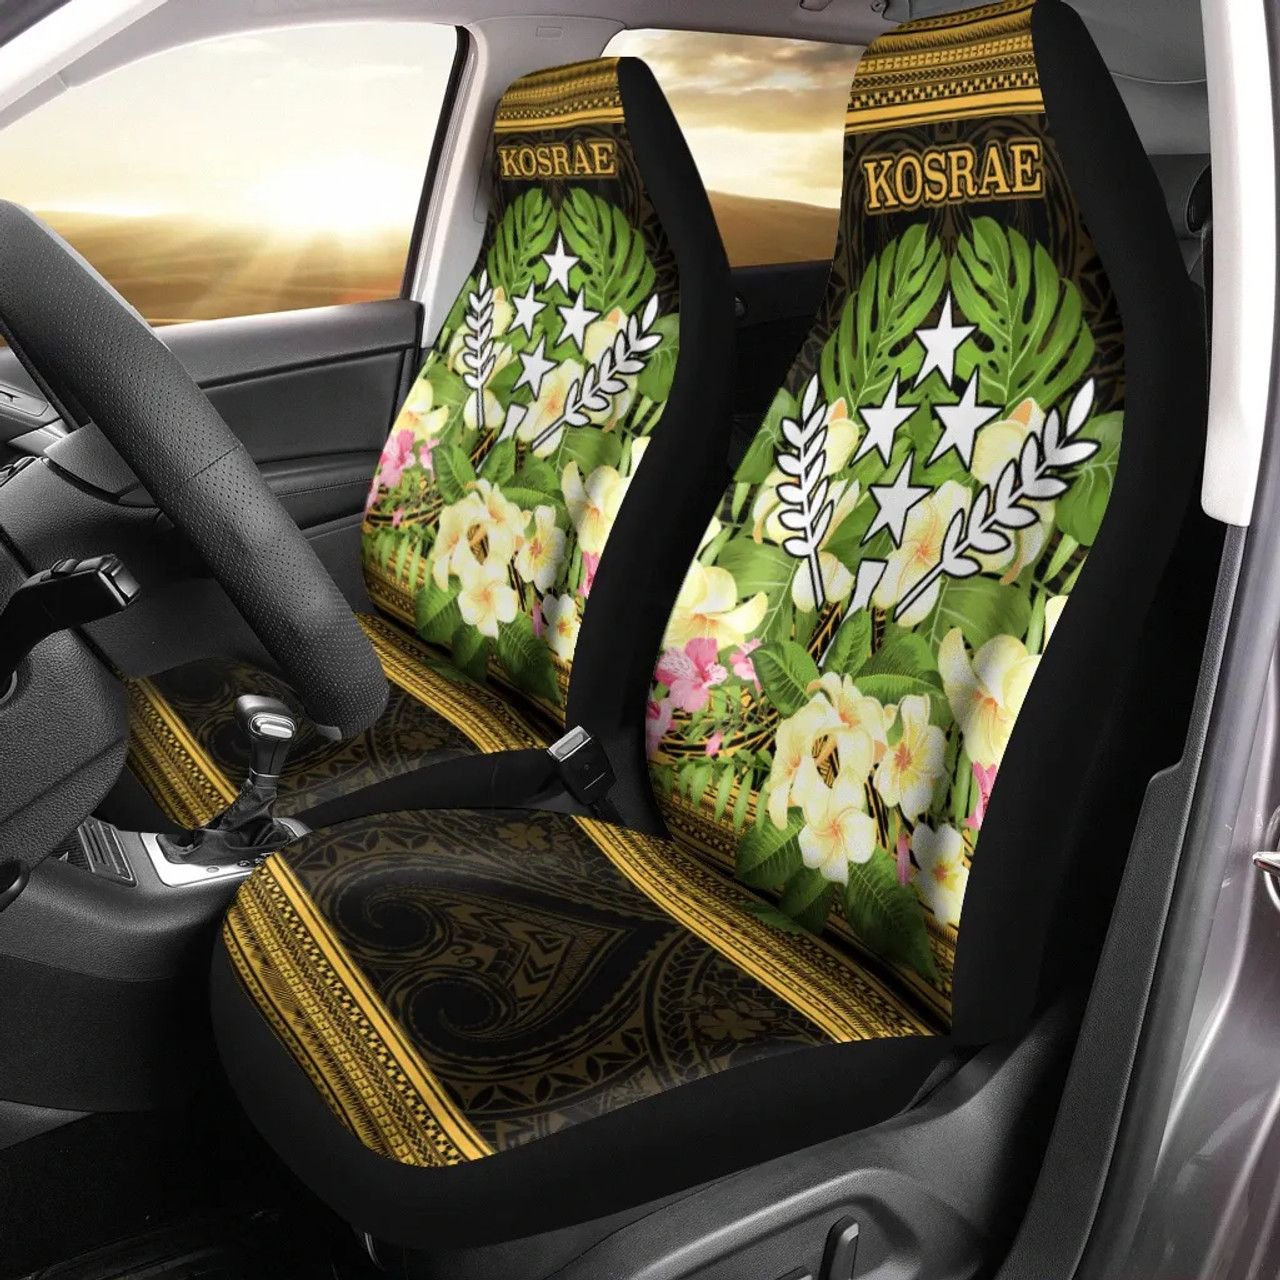 Kosrae Car Seat Cover - Polynesian Gold Patterns Collection